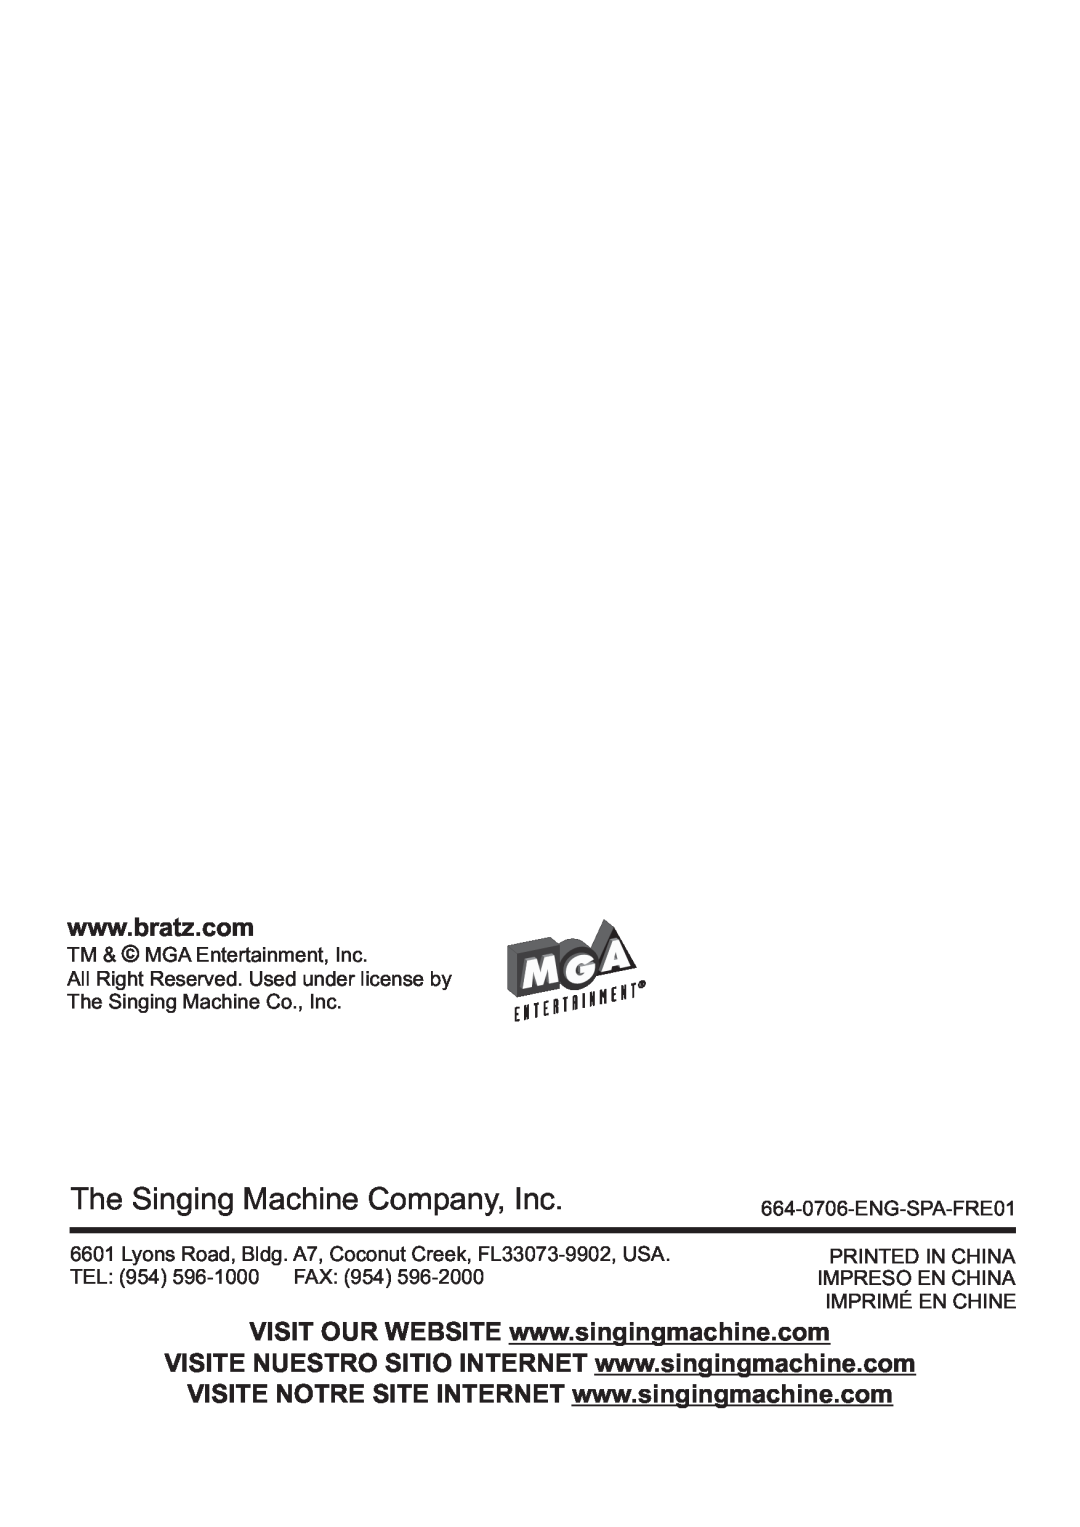 The Singing Machine SMB-664 The Singing Machine Company, Inc, TM & MGA Entertainment, Inc, ENG-SPA-FRE01, Printed In China 